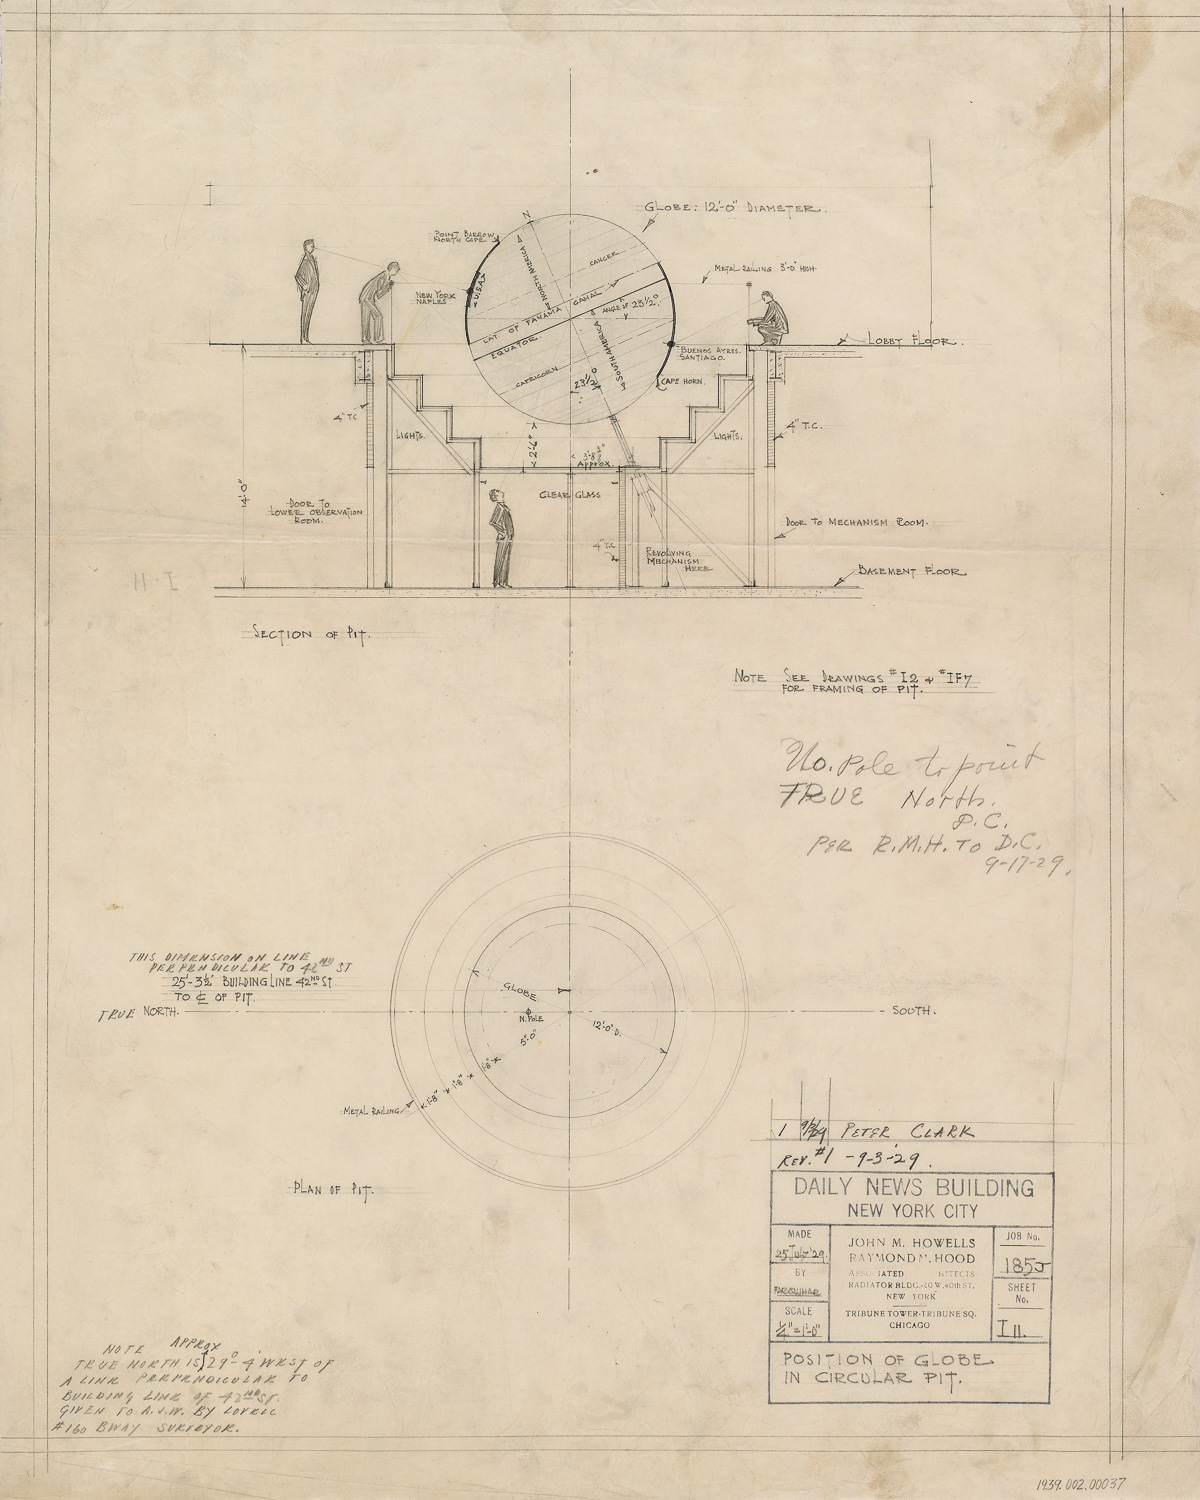 Plan and section drawings of the globe in the center of a lobby. The plan, on the lower half of the sheet, is a simple series of concentric circles. The section drawing, on the upper half of the sheet, shows a twelve-foot globe mounted at a slight angle on an axis and set into a stepped, sunken pit. Four men appear in the drawing, showing and testing scale and sight lines. Tiny pencil annotations are scattered throughout the drawing and there is a title block in the lower right corner listing the name of the project and the date.